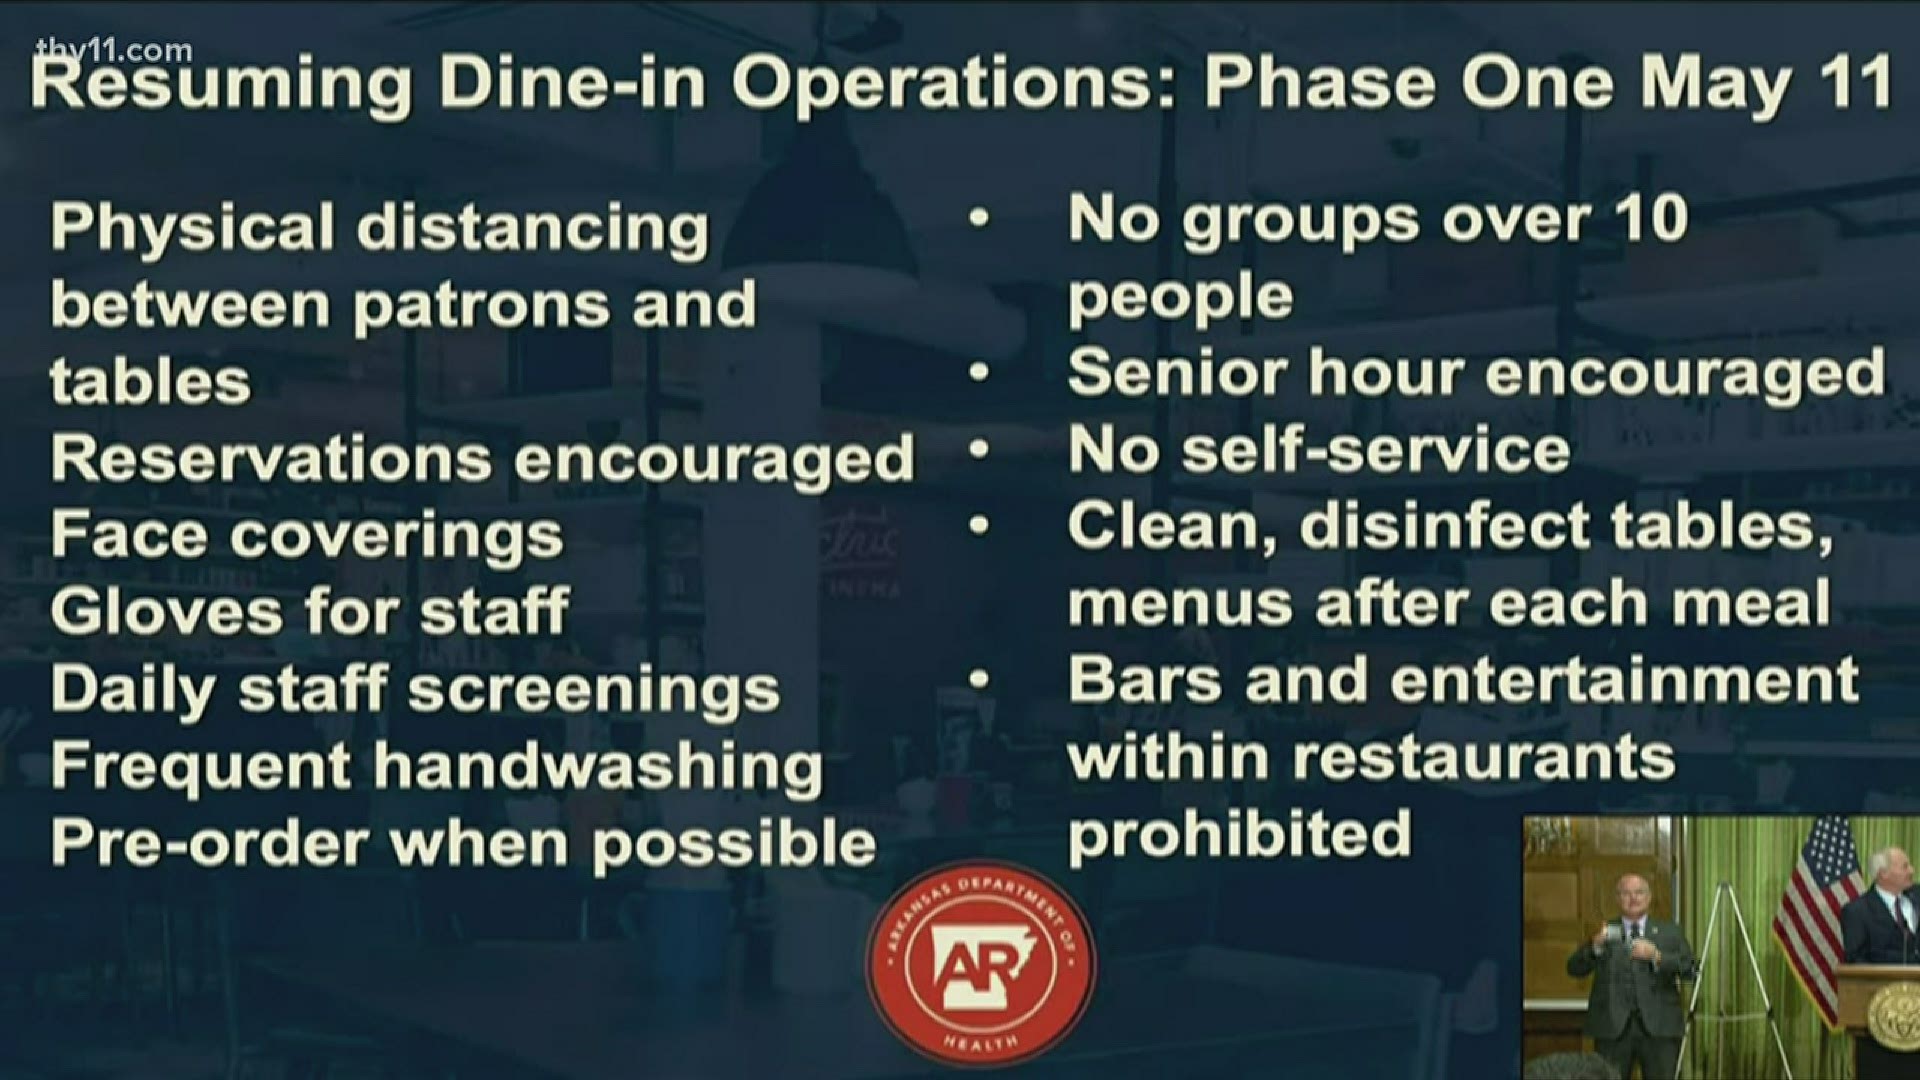 Gov. Hutchinson announced that restaurants will resume limited dine-in on May 11 as Arkansas begins scaling back restrictions during the coronavirus pandemic.